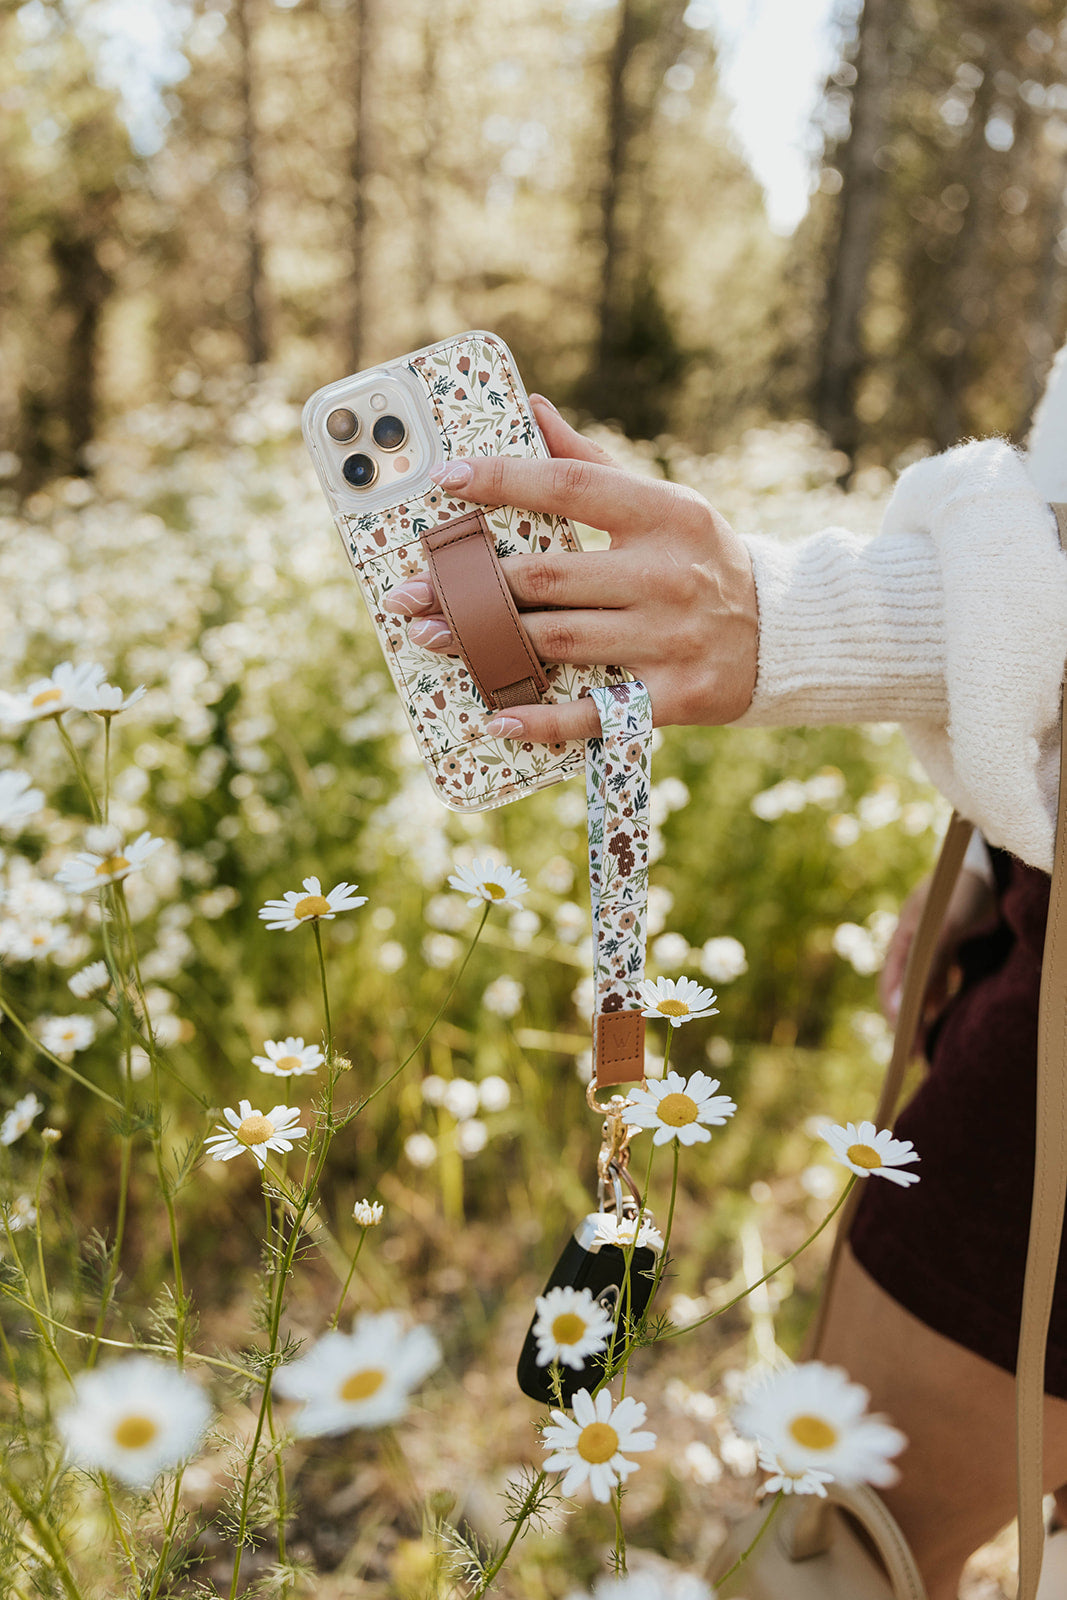 Walli Cases Falling for Floral Apple Watch Band